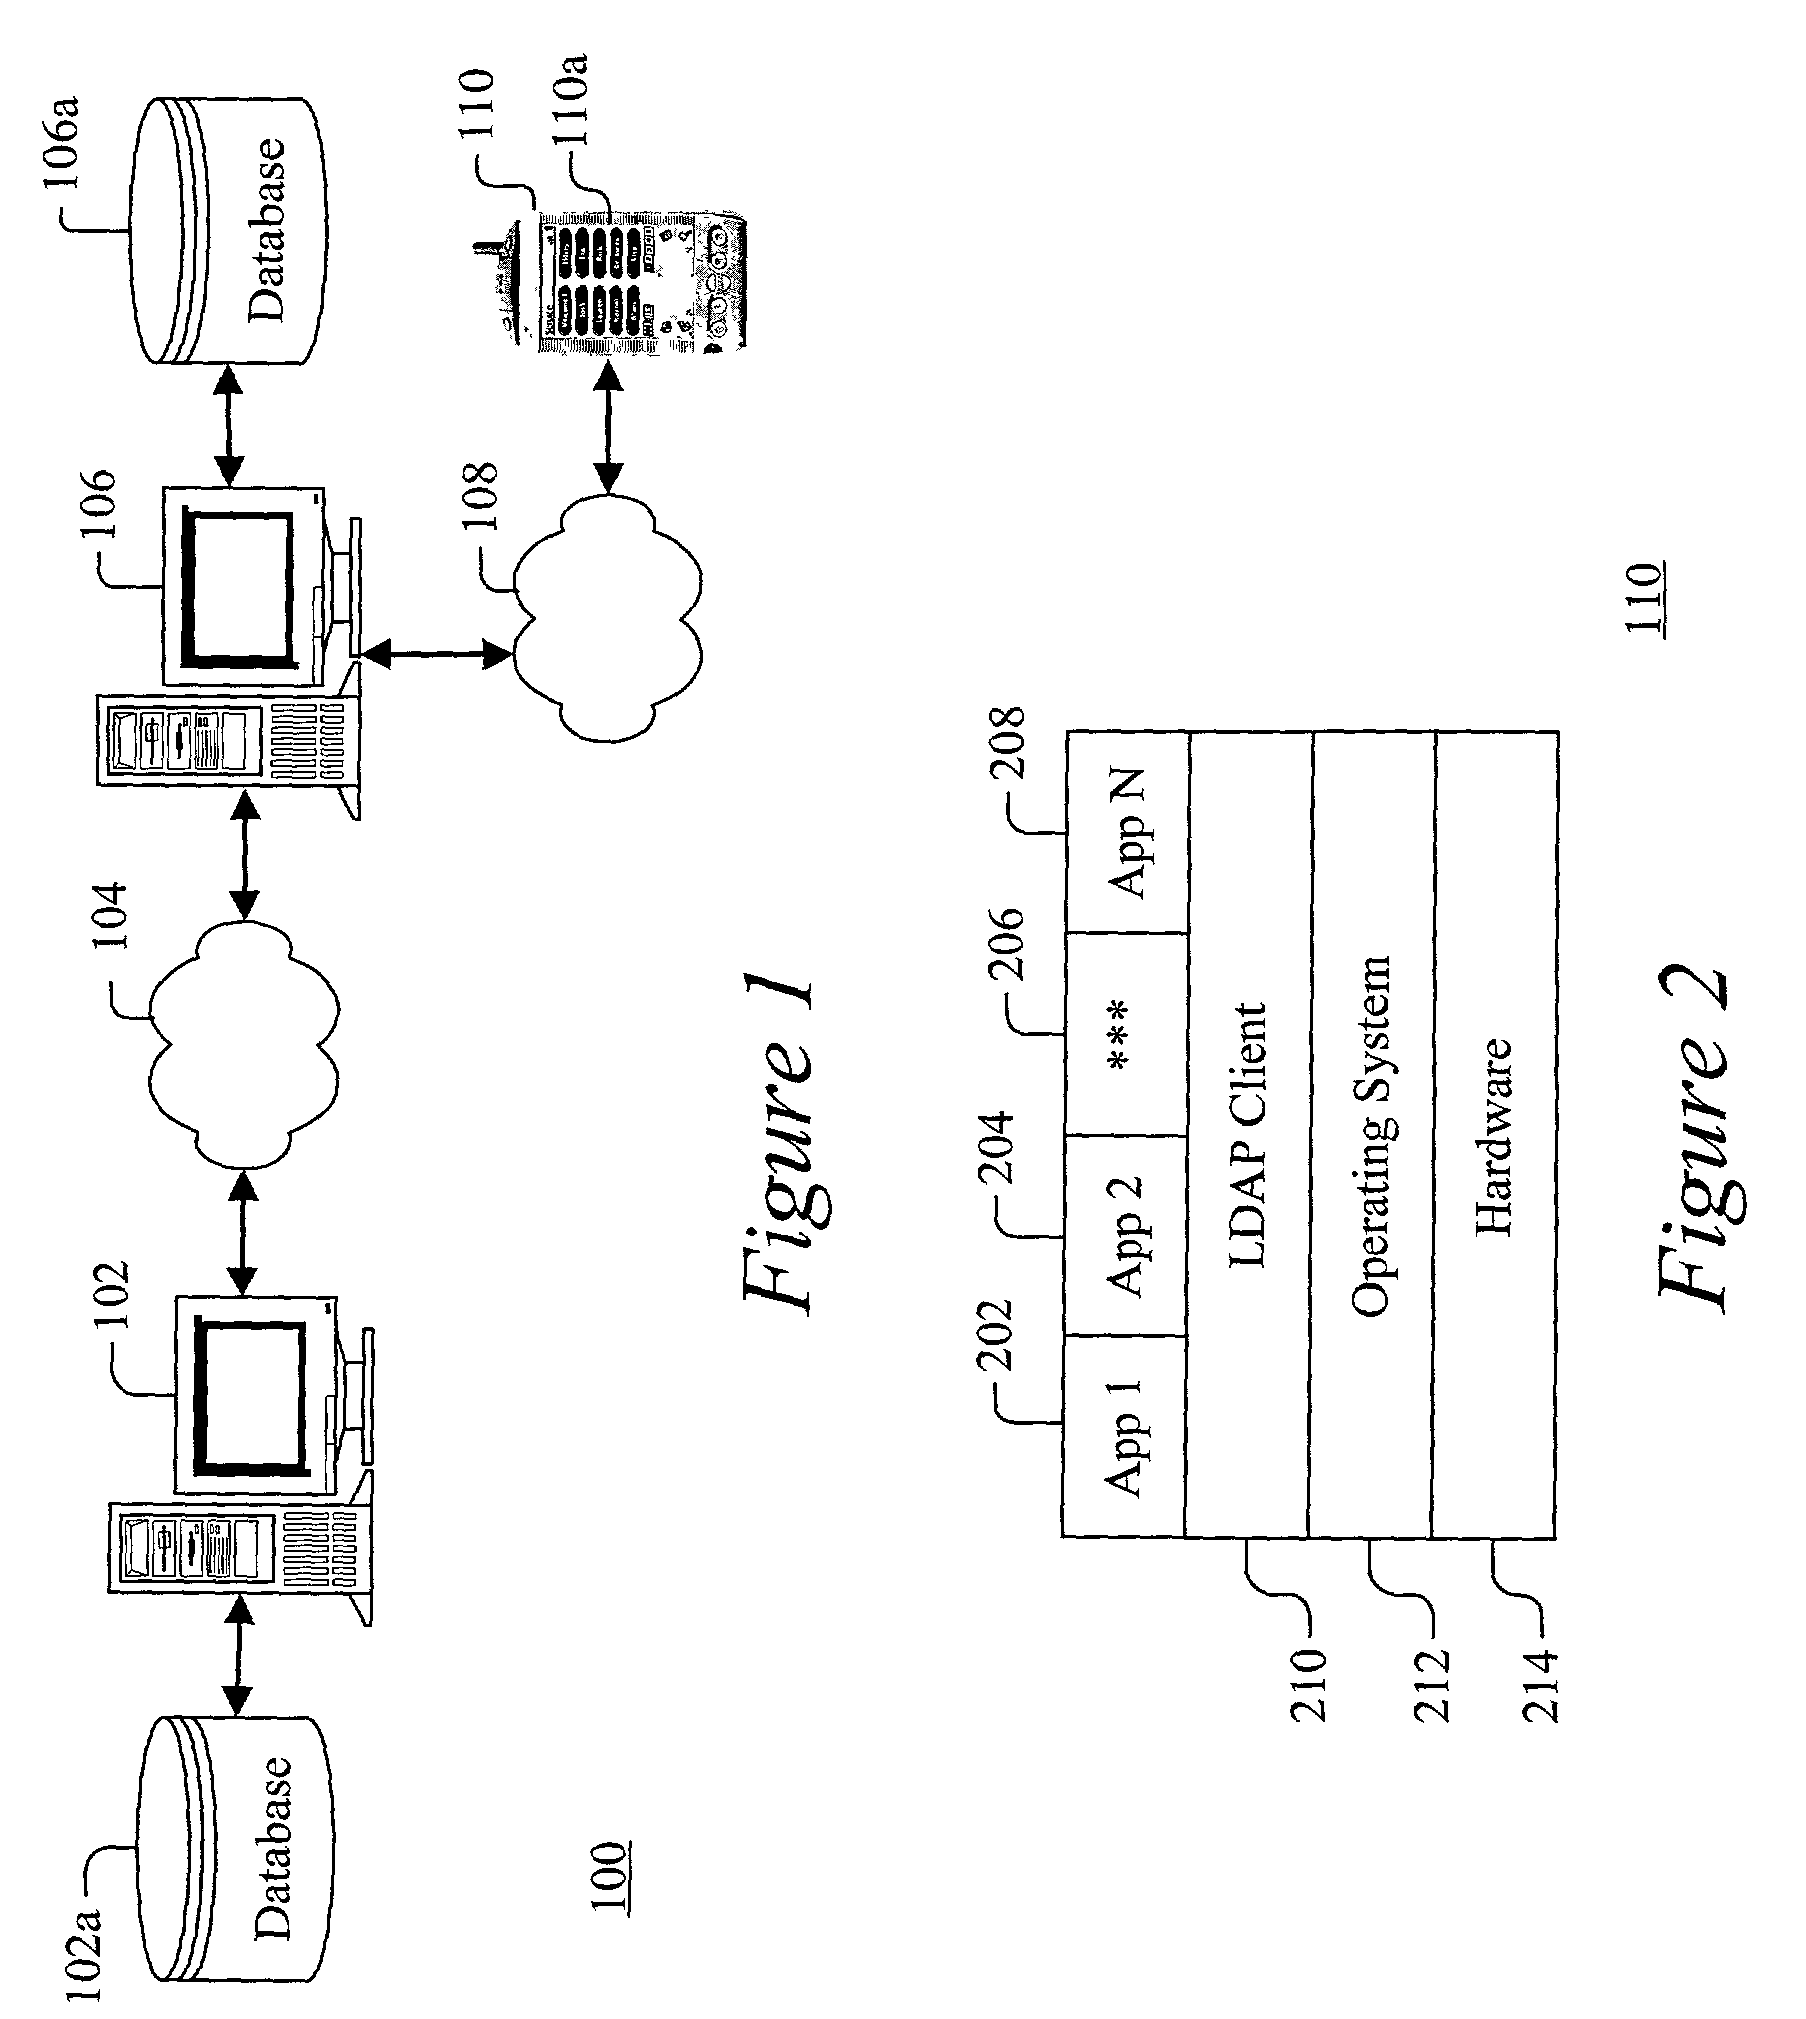 Method, device and computer program product including a lightweight directory access protocol client